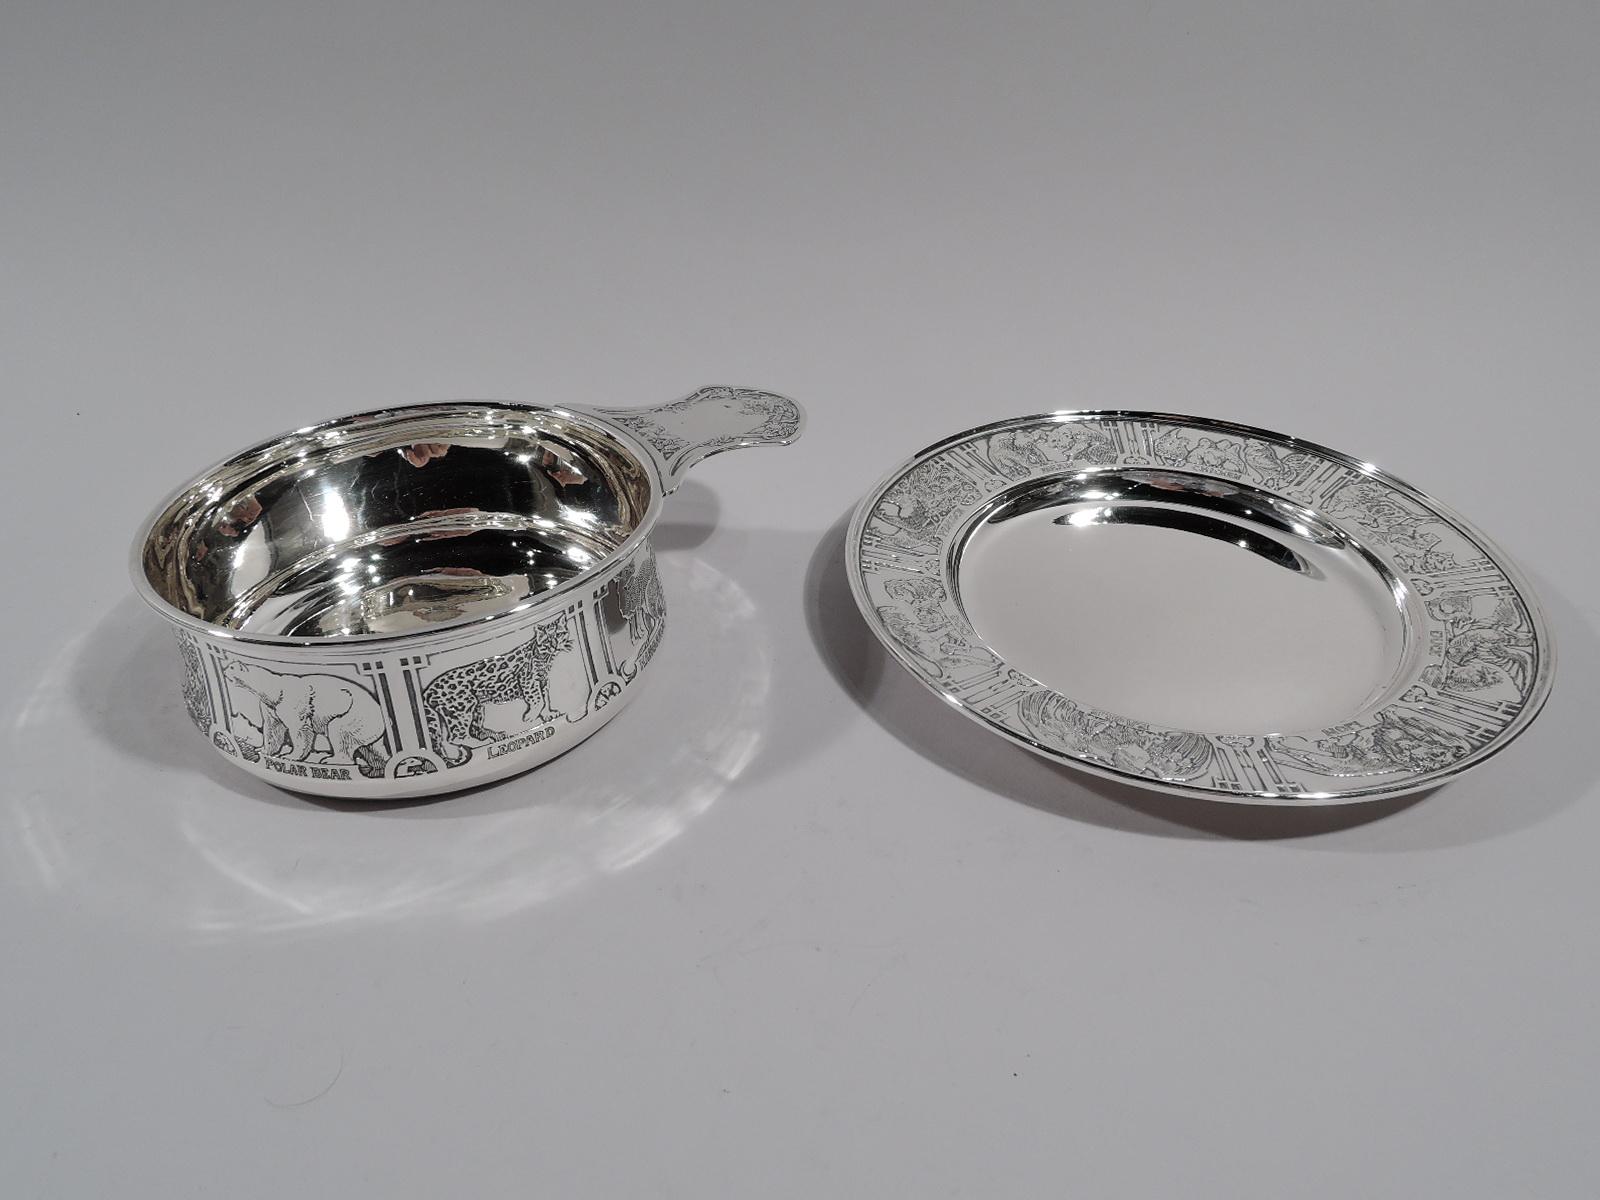 Edwardian sterling silver baby porringer on plate. Made by Kerr in Newark, circa 1915. Porringer has gently upward tapering sides and solid shaped handle. Plate has deep plain well. Acid-etched menagerie with lions and tigers and bears as well as